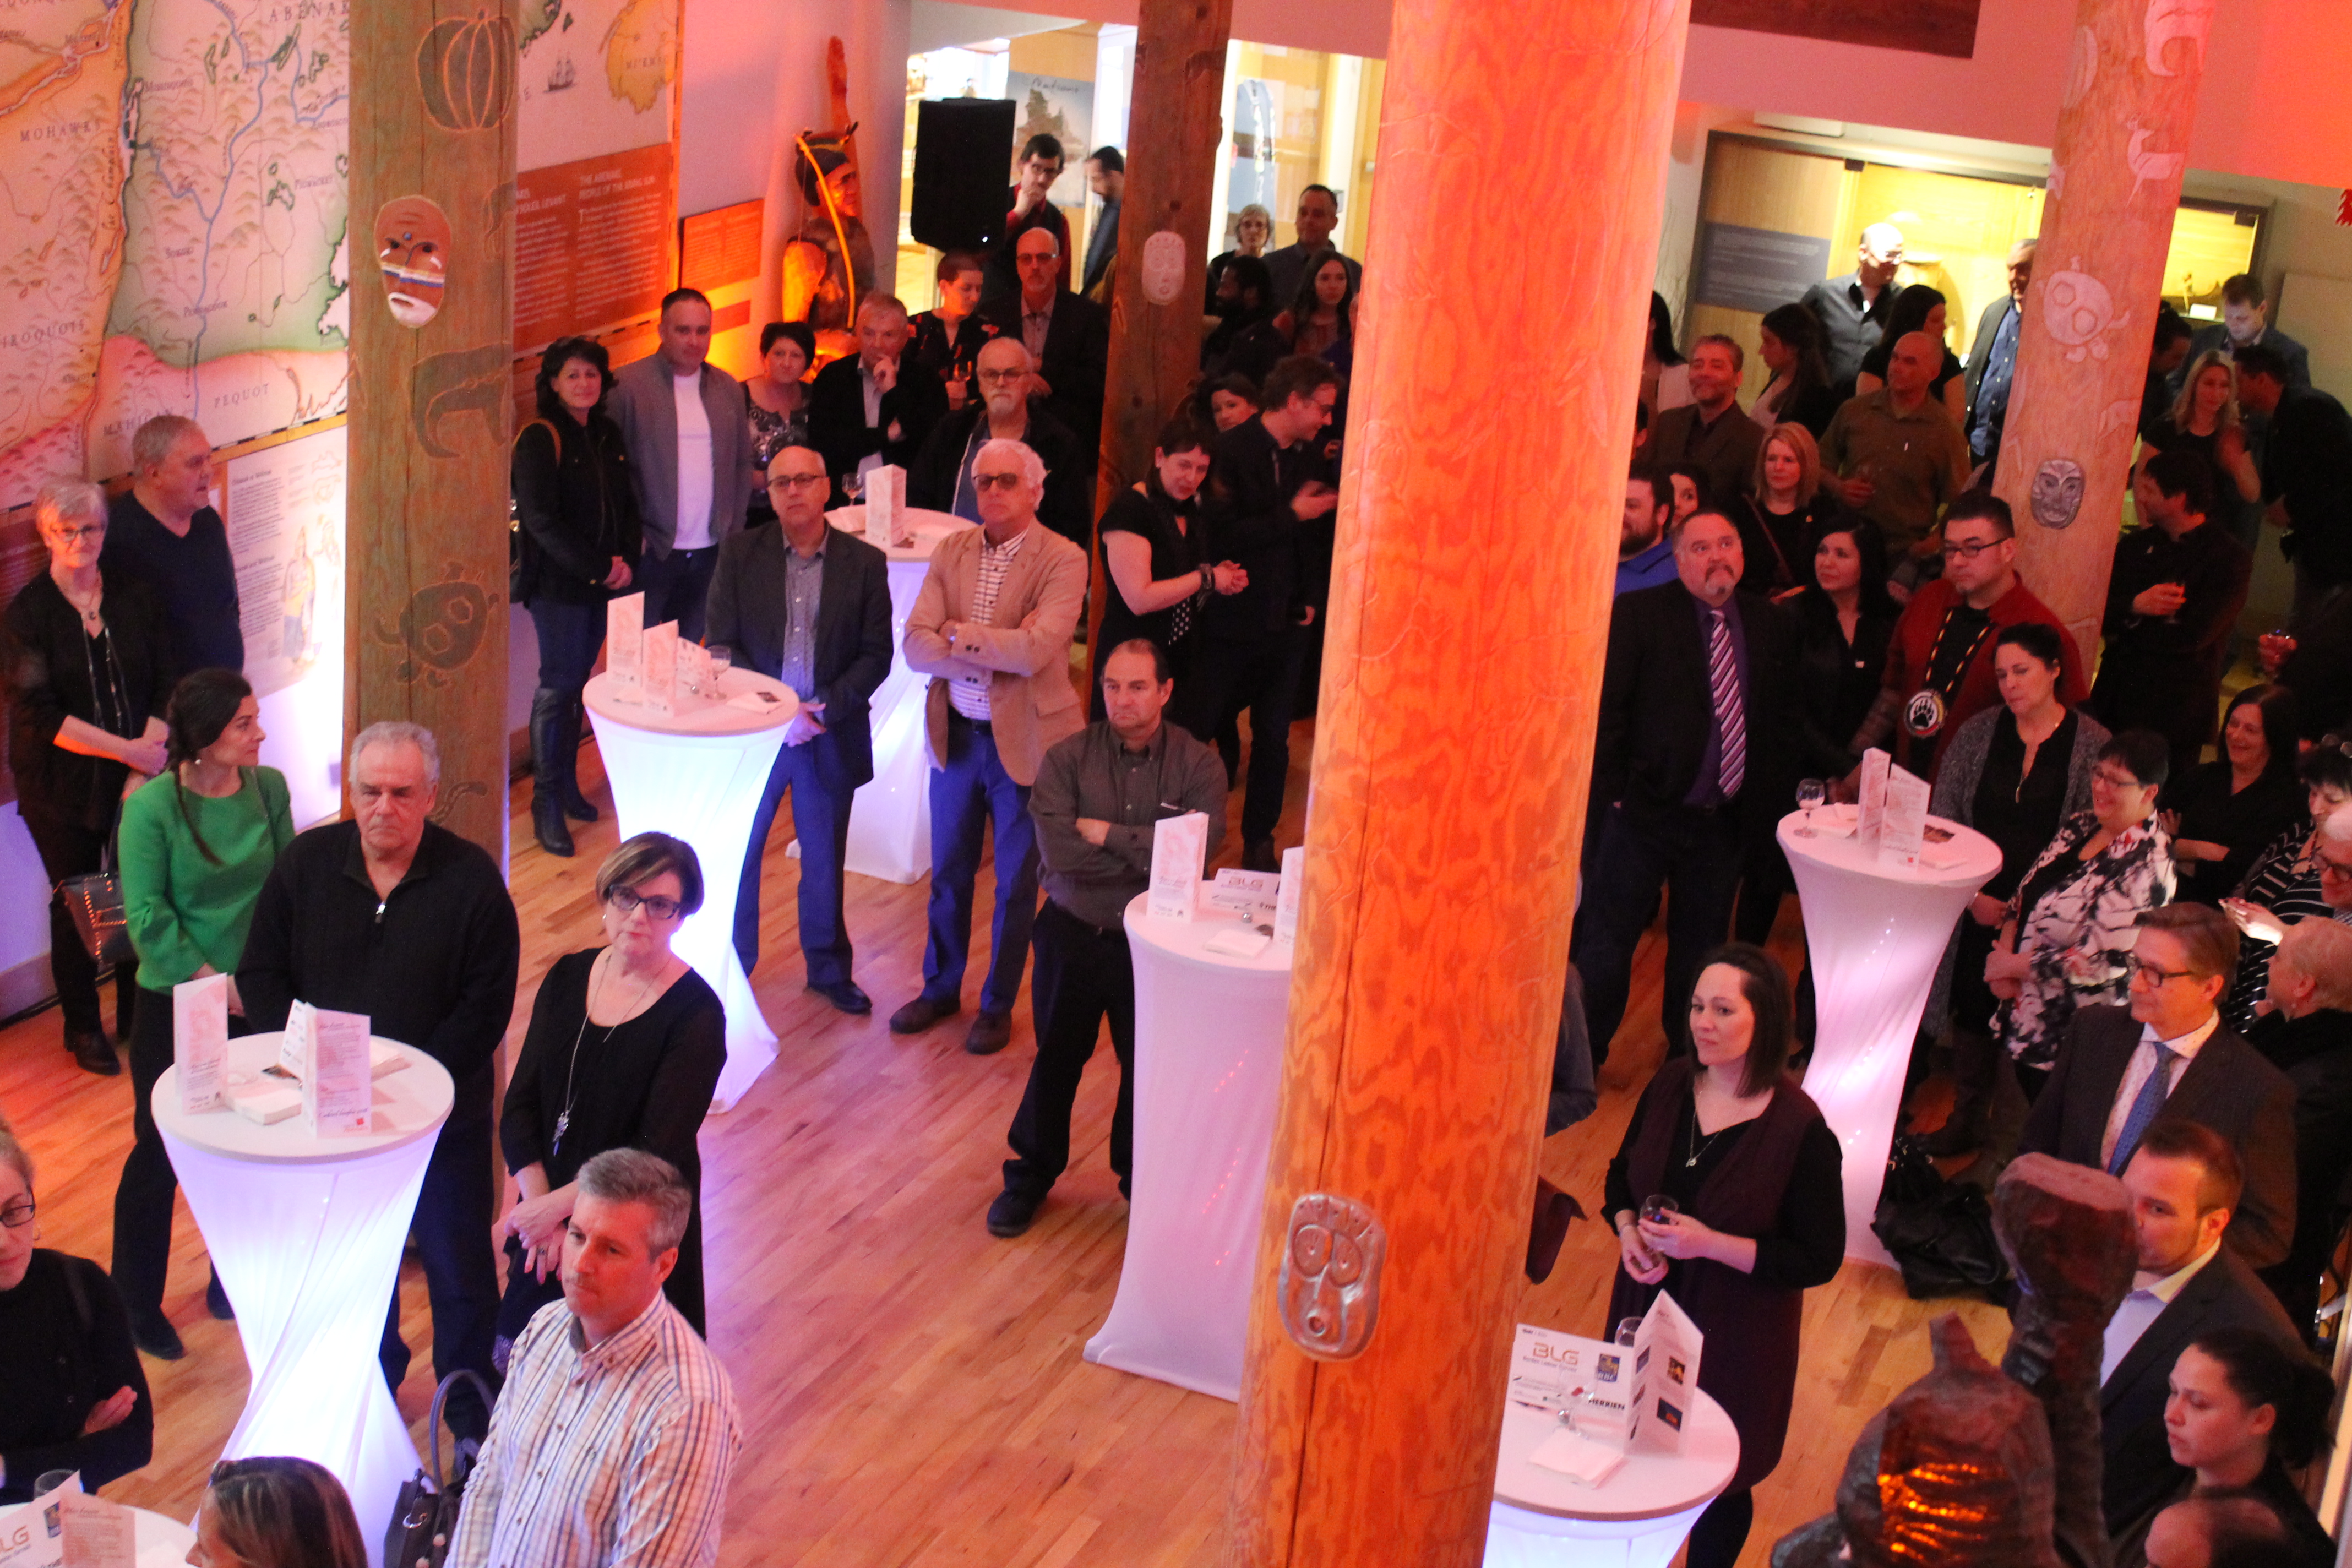 A record year for the 7th edition of the Musée des Abénakis fundraising cocktail party!